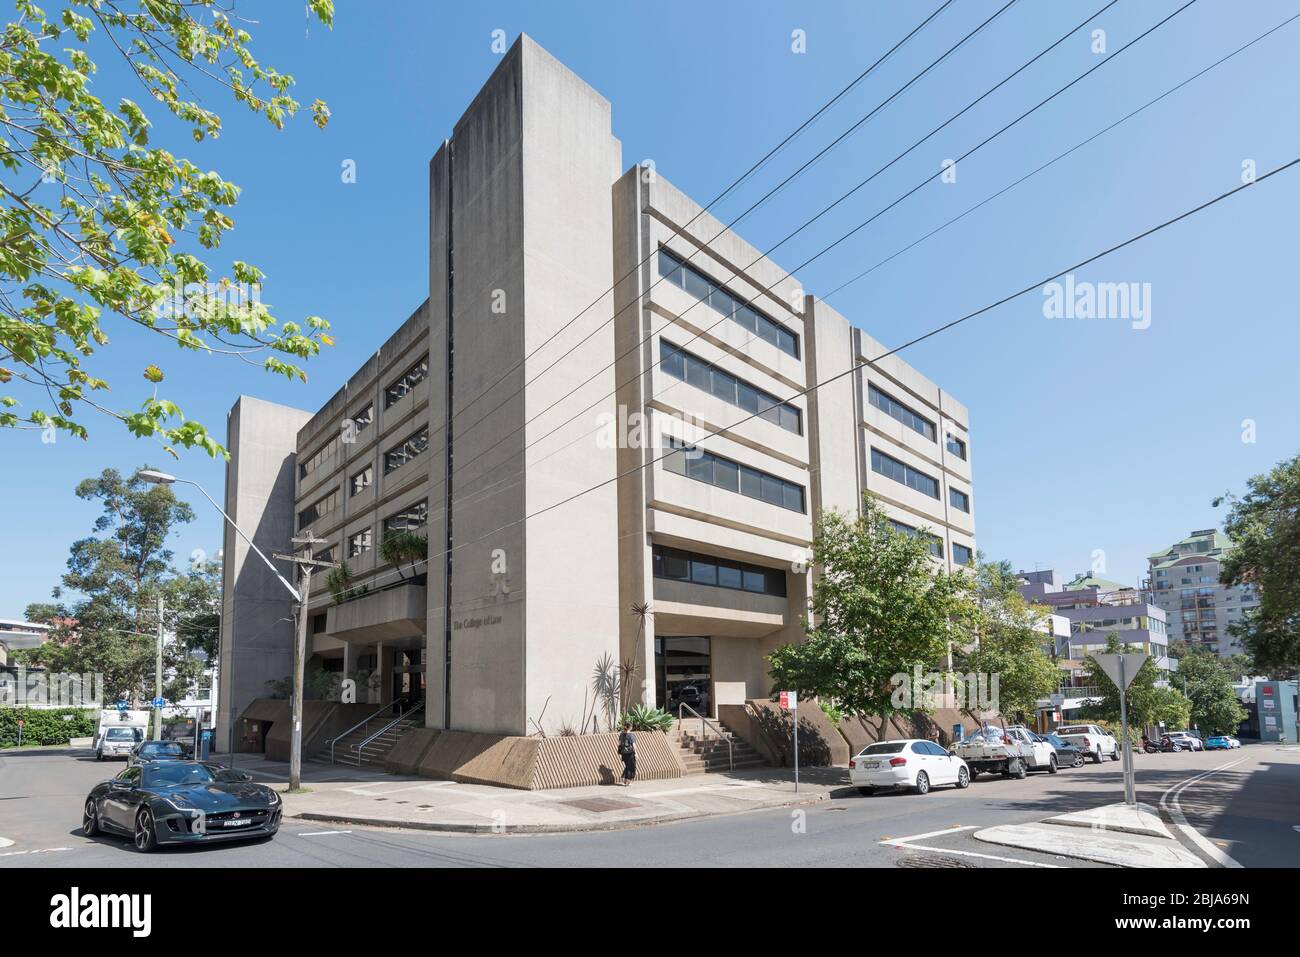 The 1976 constructed College of Law building in Chandos Street, St Leonards in northern Sydney, Australia. A good example of Brutalist architecture Stock Photo